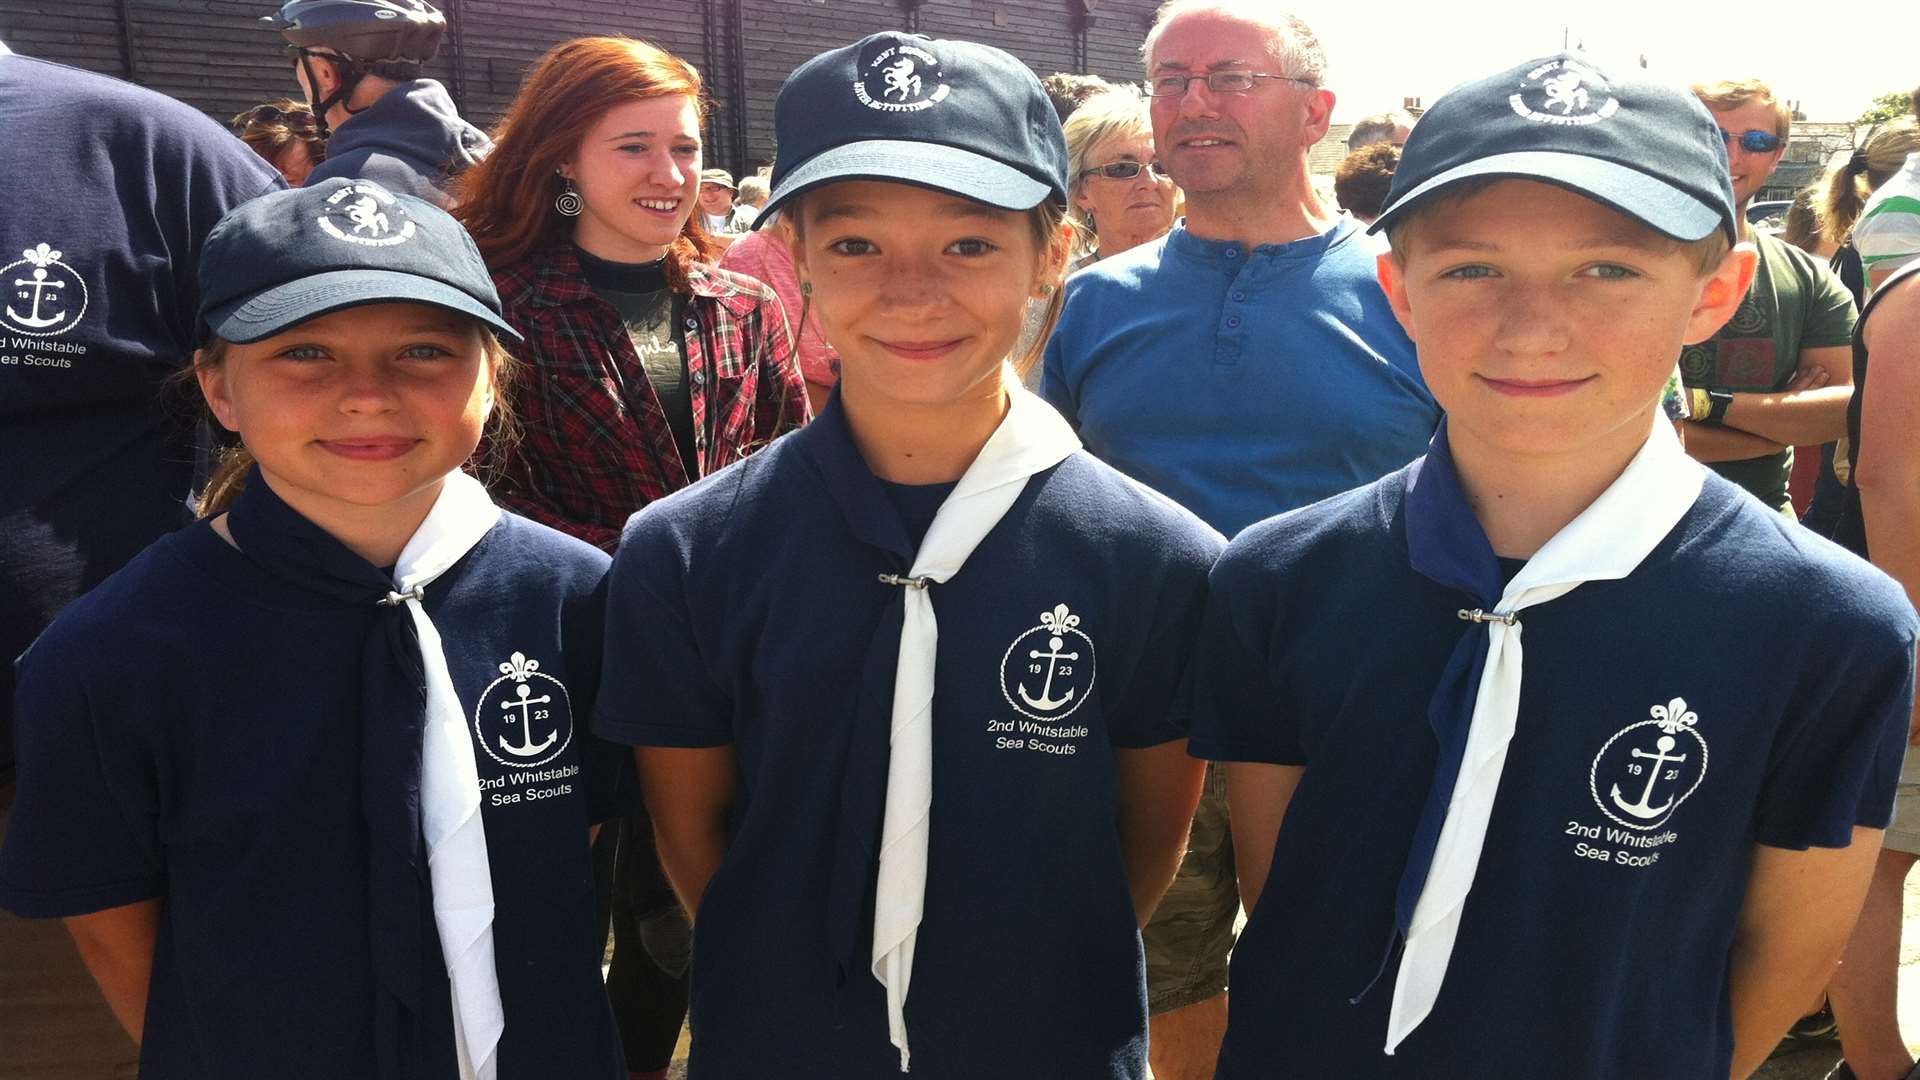 Whitstable Sea Scouts